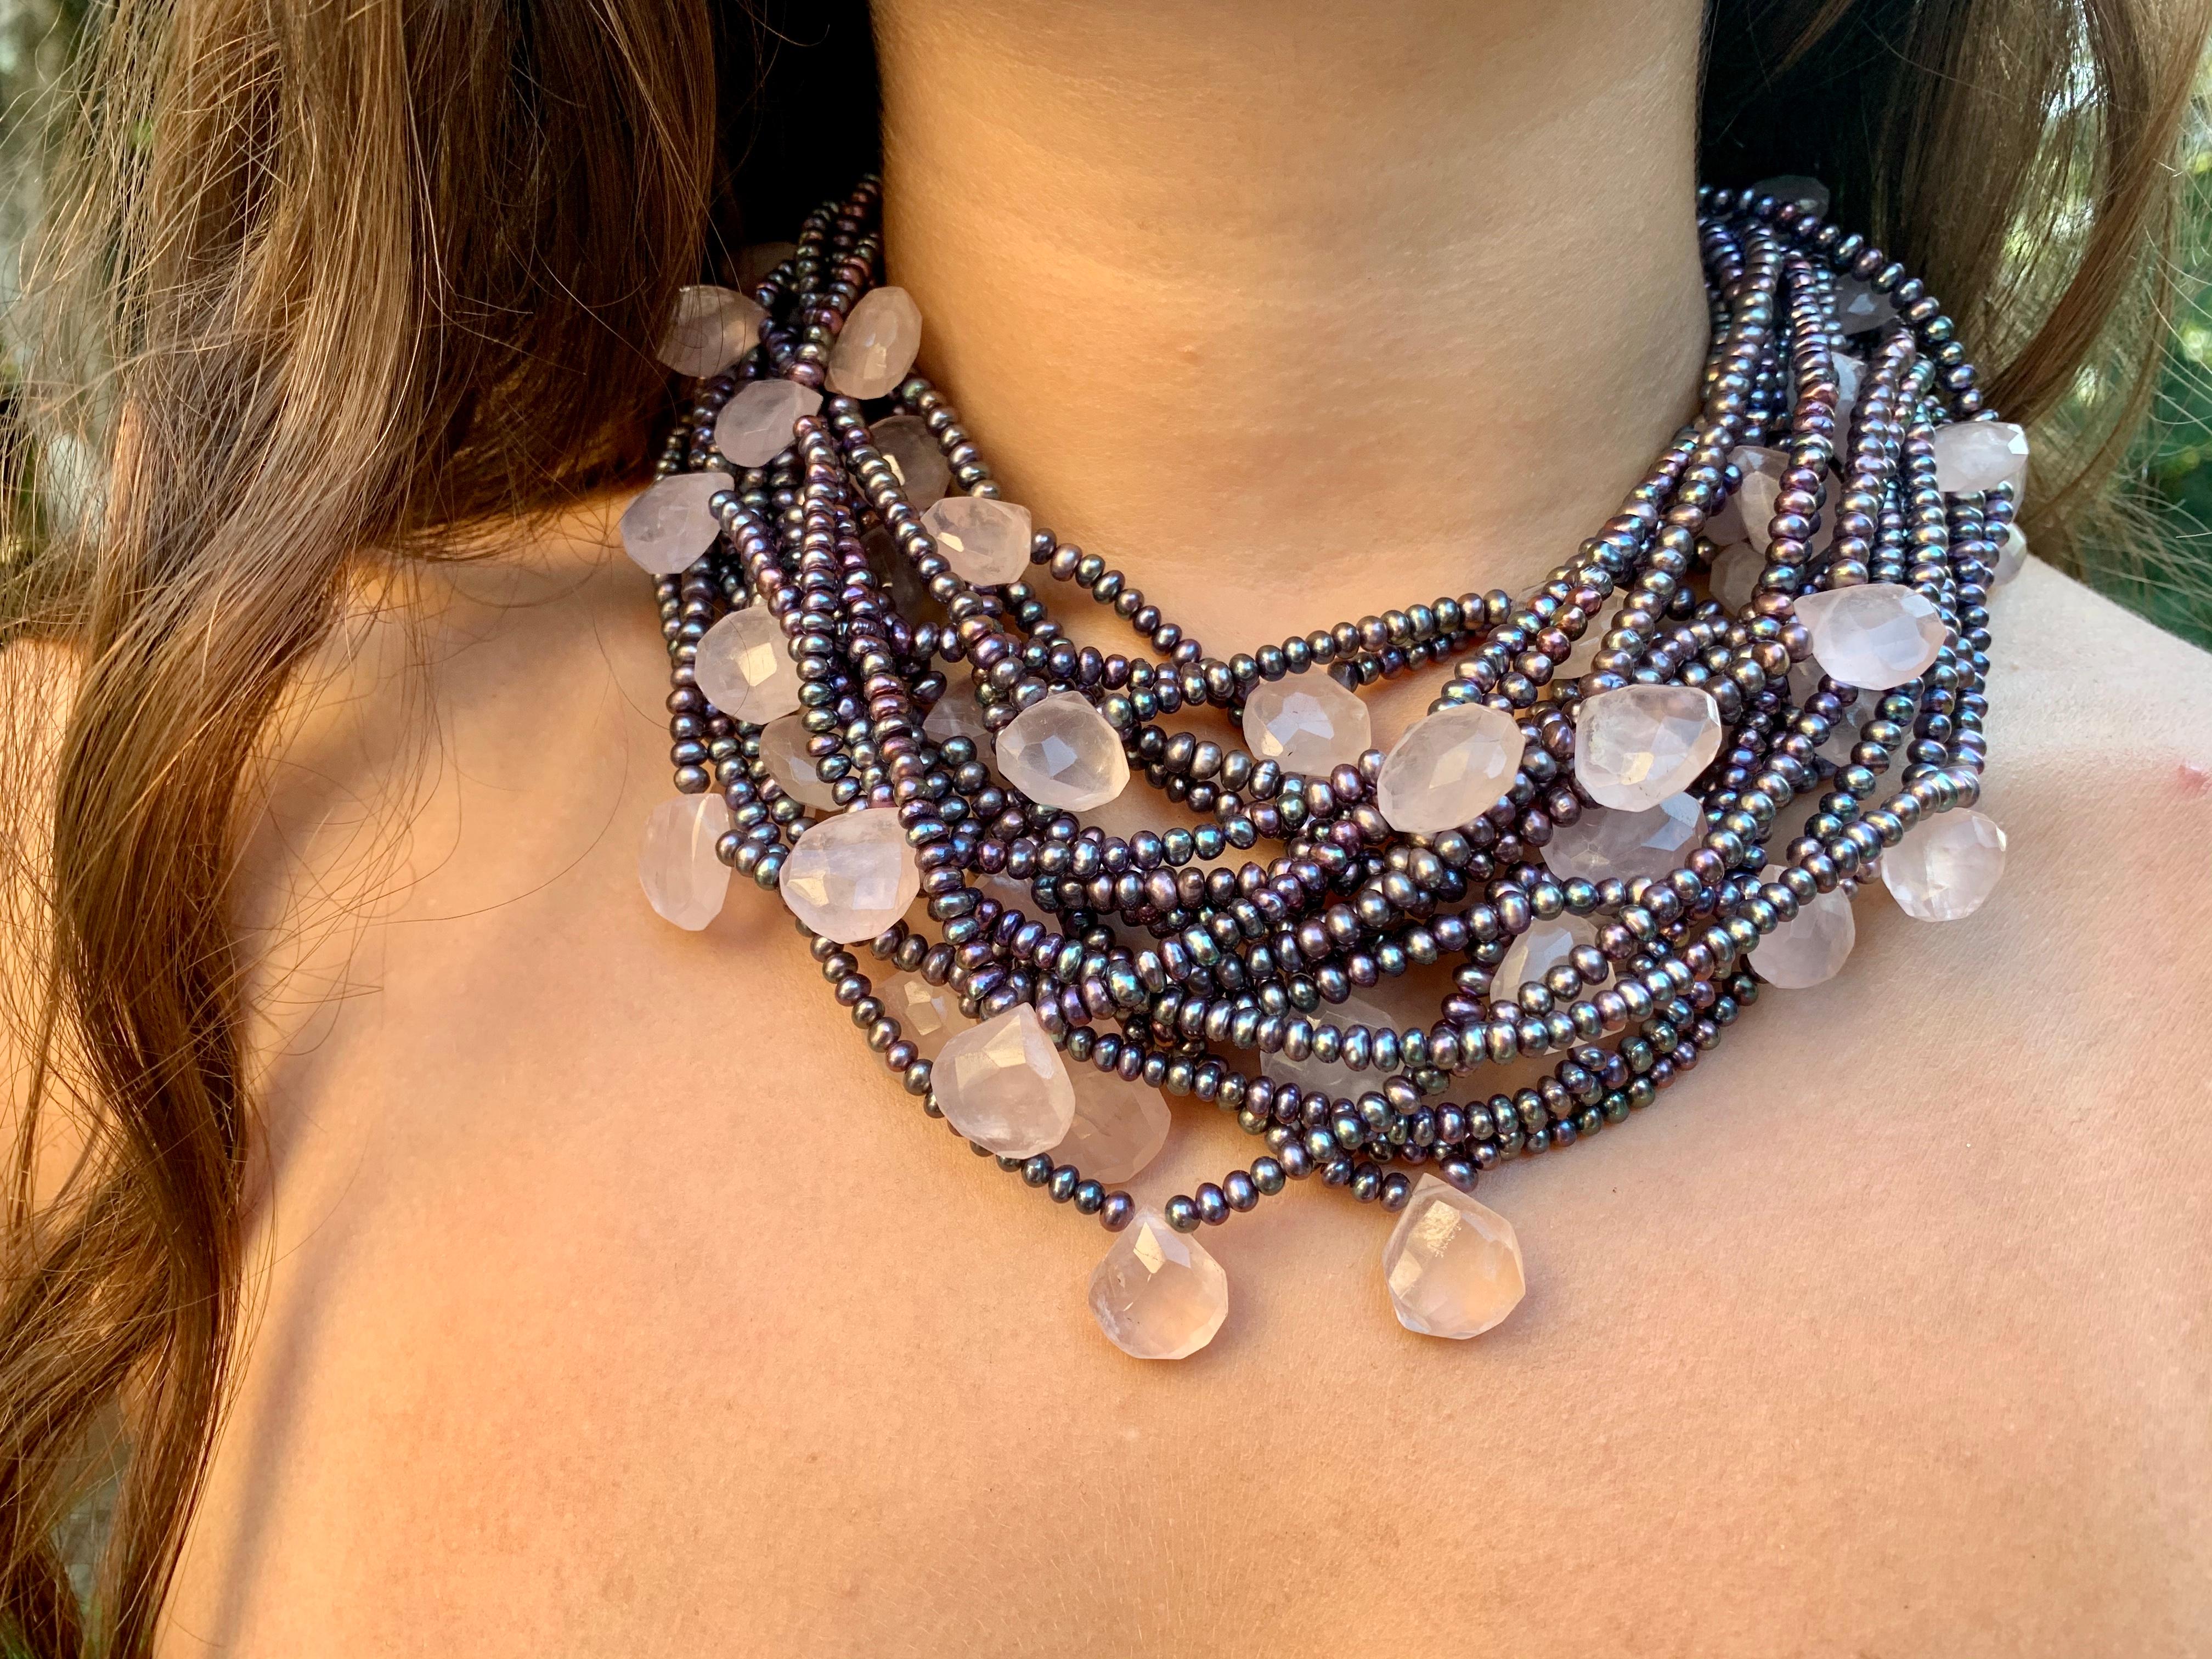 Stunning dramatic statement necklace of black, aubergine, green, blue and silver Akoya pearls and faceted natural pink quartz pendants with a 14K white gold butterfly form clasp. The pearls well matched with good lustre, rich in color, approximately